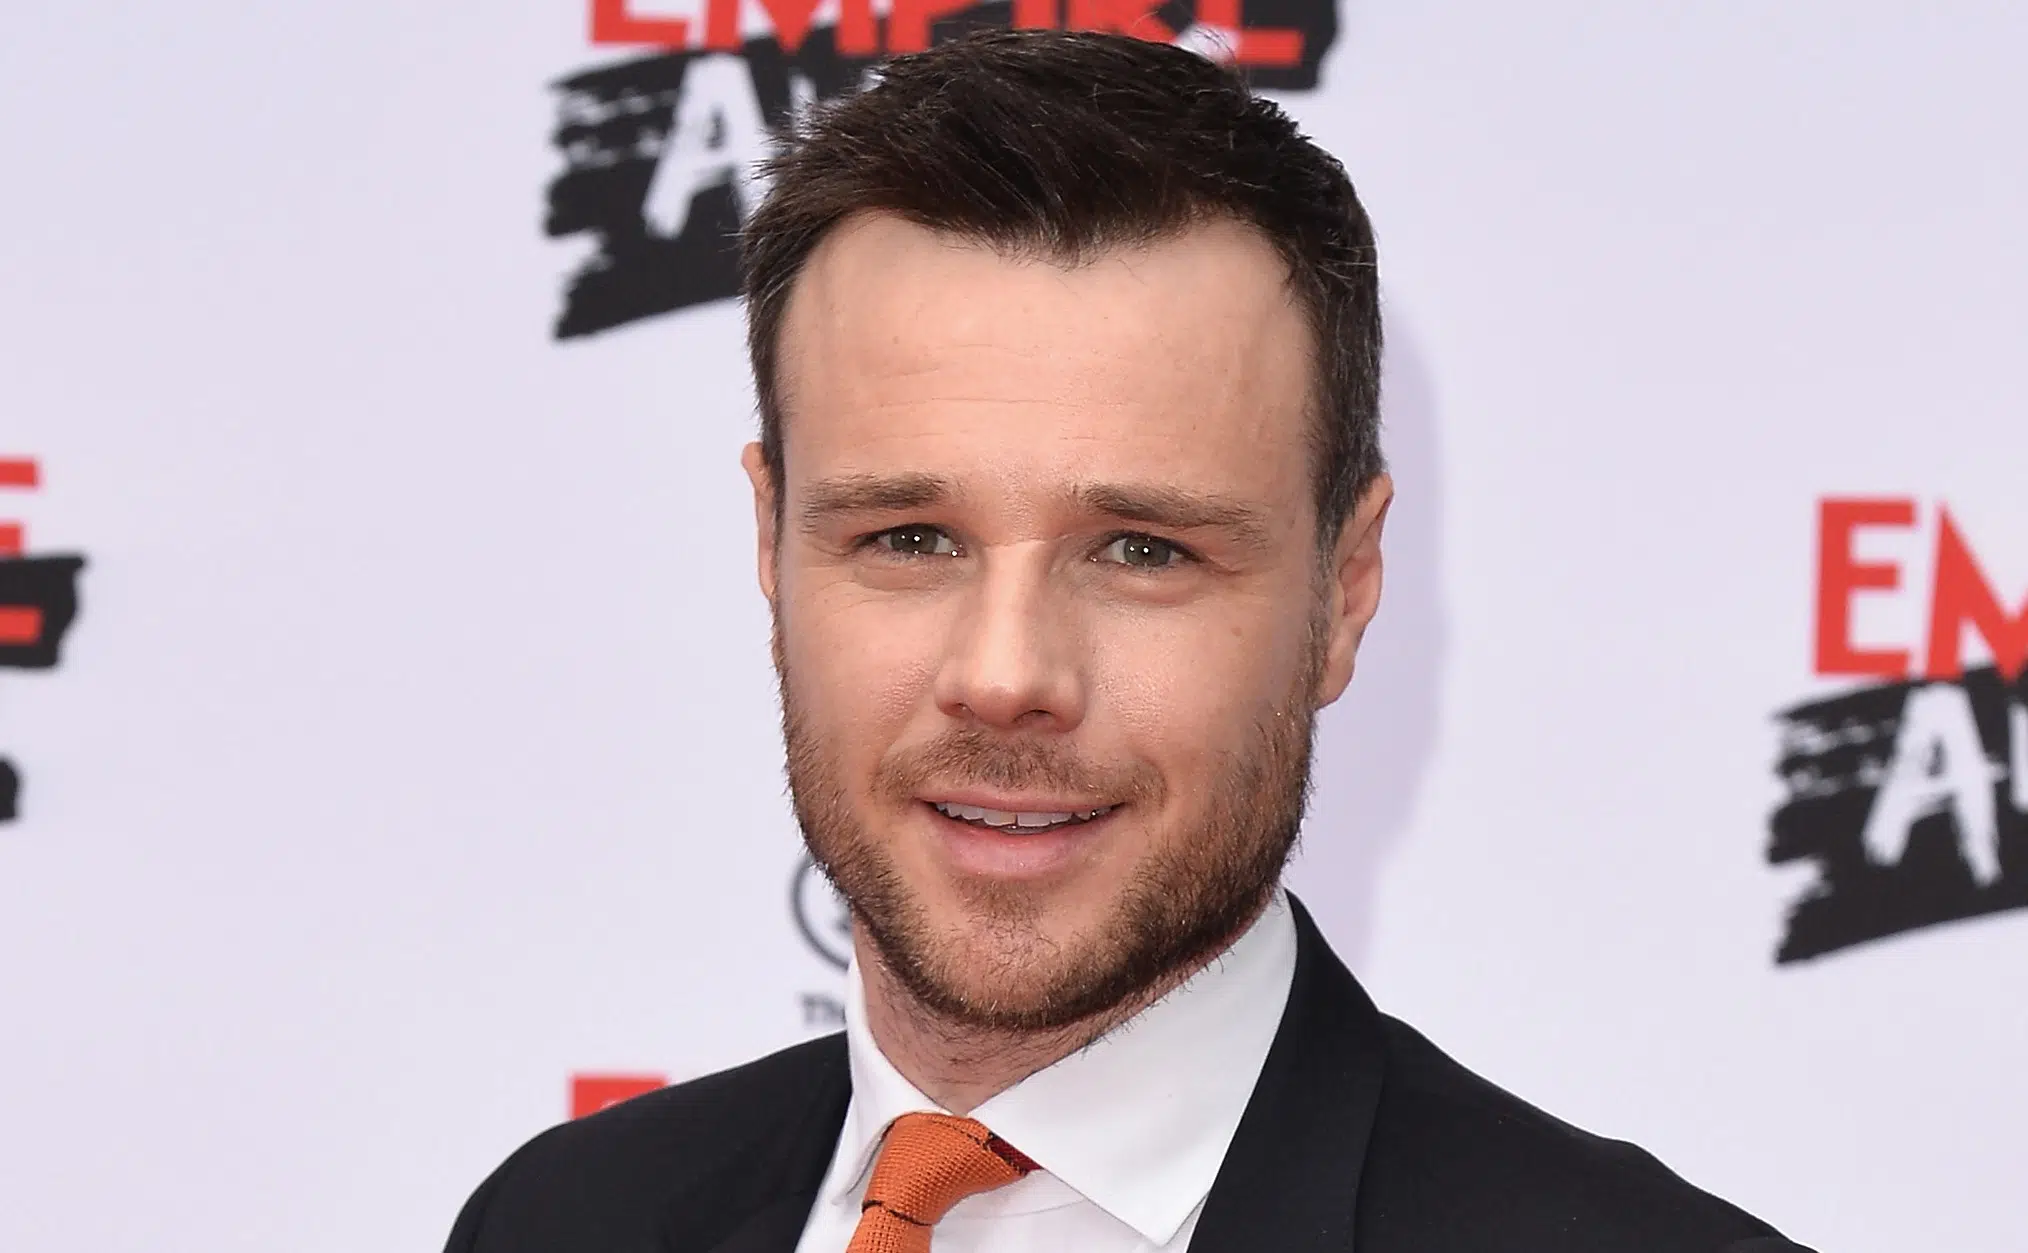 The Man in the High Castle Cast - Rupert Evans as Frank Frink